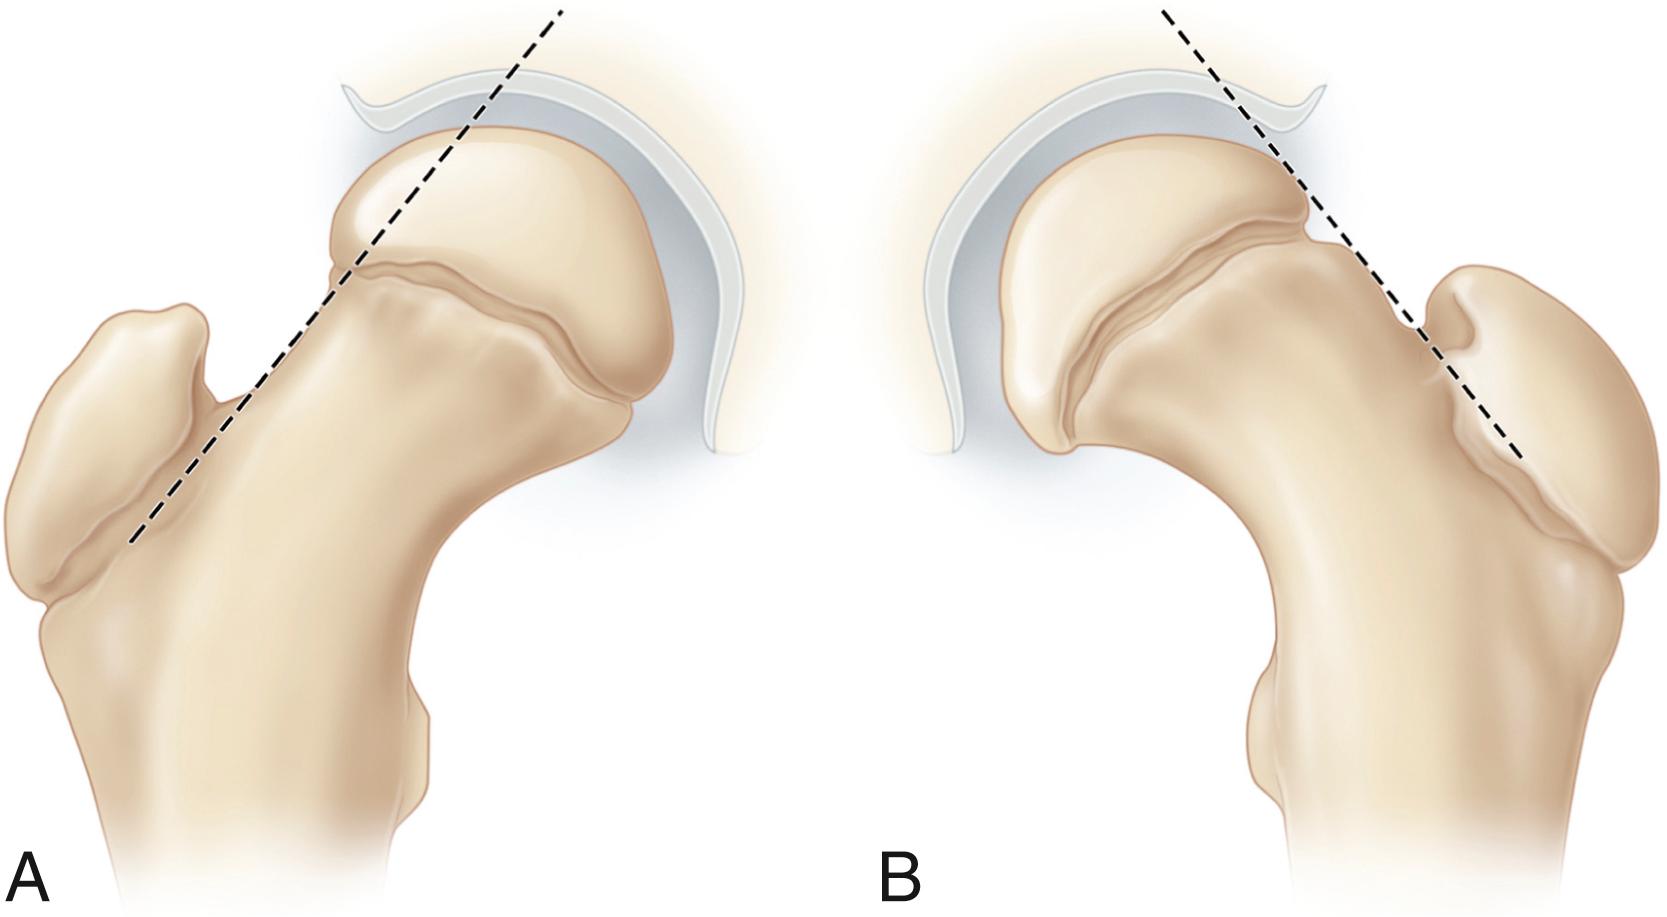 FIG. 15.6, Anteroposterior radiographic appearance of a normal hip and a hip with mild chronic slipped capital femoral epiphysis. (A) Normal hip. A line drawn parallel to the superior femoral neck (Klein line) will intersect the lateral-most portion of the capital femoral epiphysis. (B) Hip with mild chronic slip. Klein line does not intersect the capital epiphysis (Trethowan sign). Lateral radiographs will confirm the diagnosis.